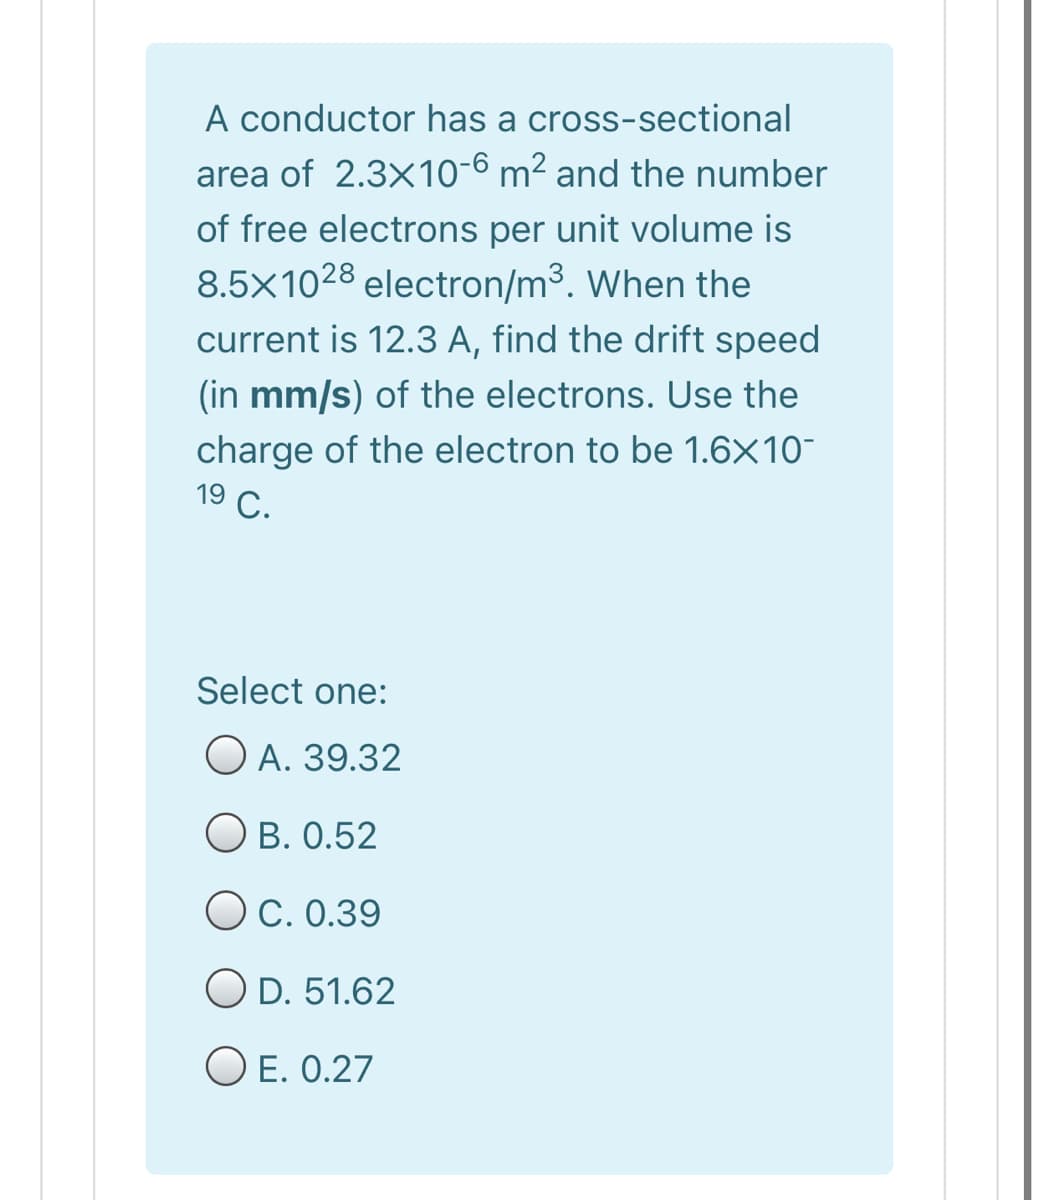 A conductor has a cross-sectional
area of 2.3x10-6 m² and the number
of free electrons per unit volume is
8.5X1028 electron/m3. When the
current is 12.3 A, find the drift speed
(in mm/s) of the electrons. Use the
charge of the electron to be 1.6X10-
19
9 С.
Select one:
O A. 39.32
О В. О.52
OC. 0.39
O D. 51.62
O E. 0.27
